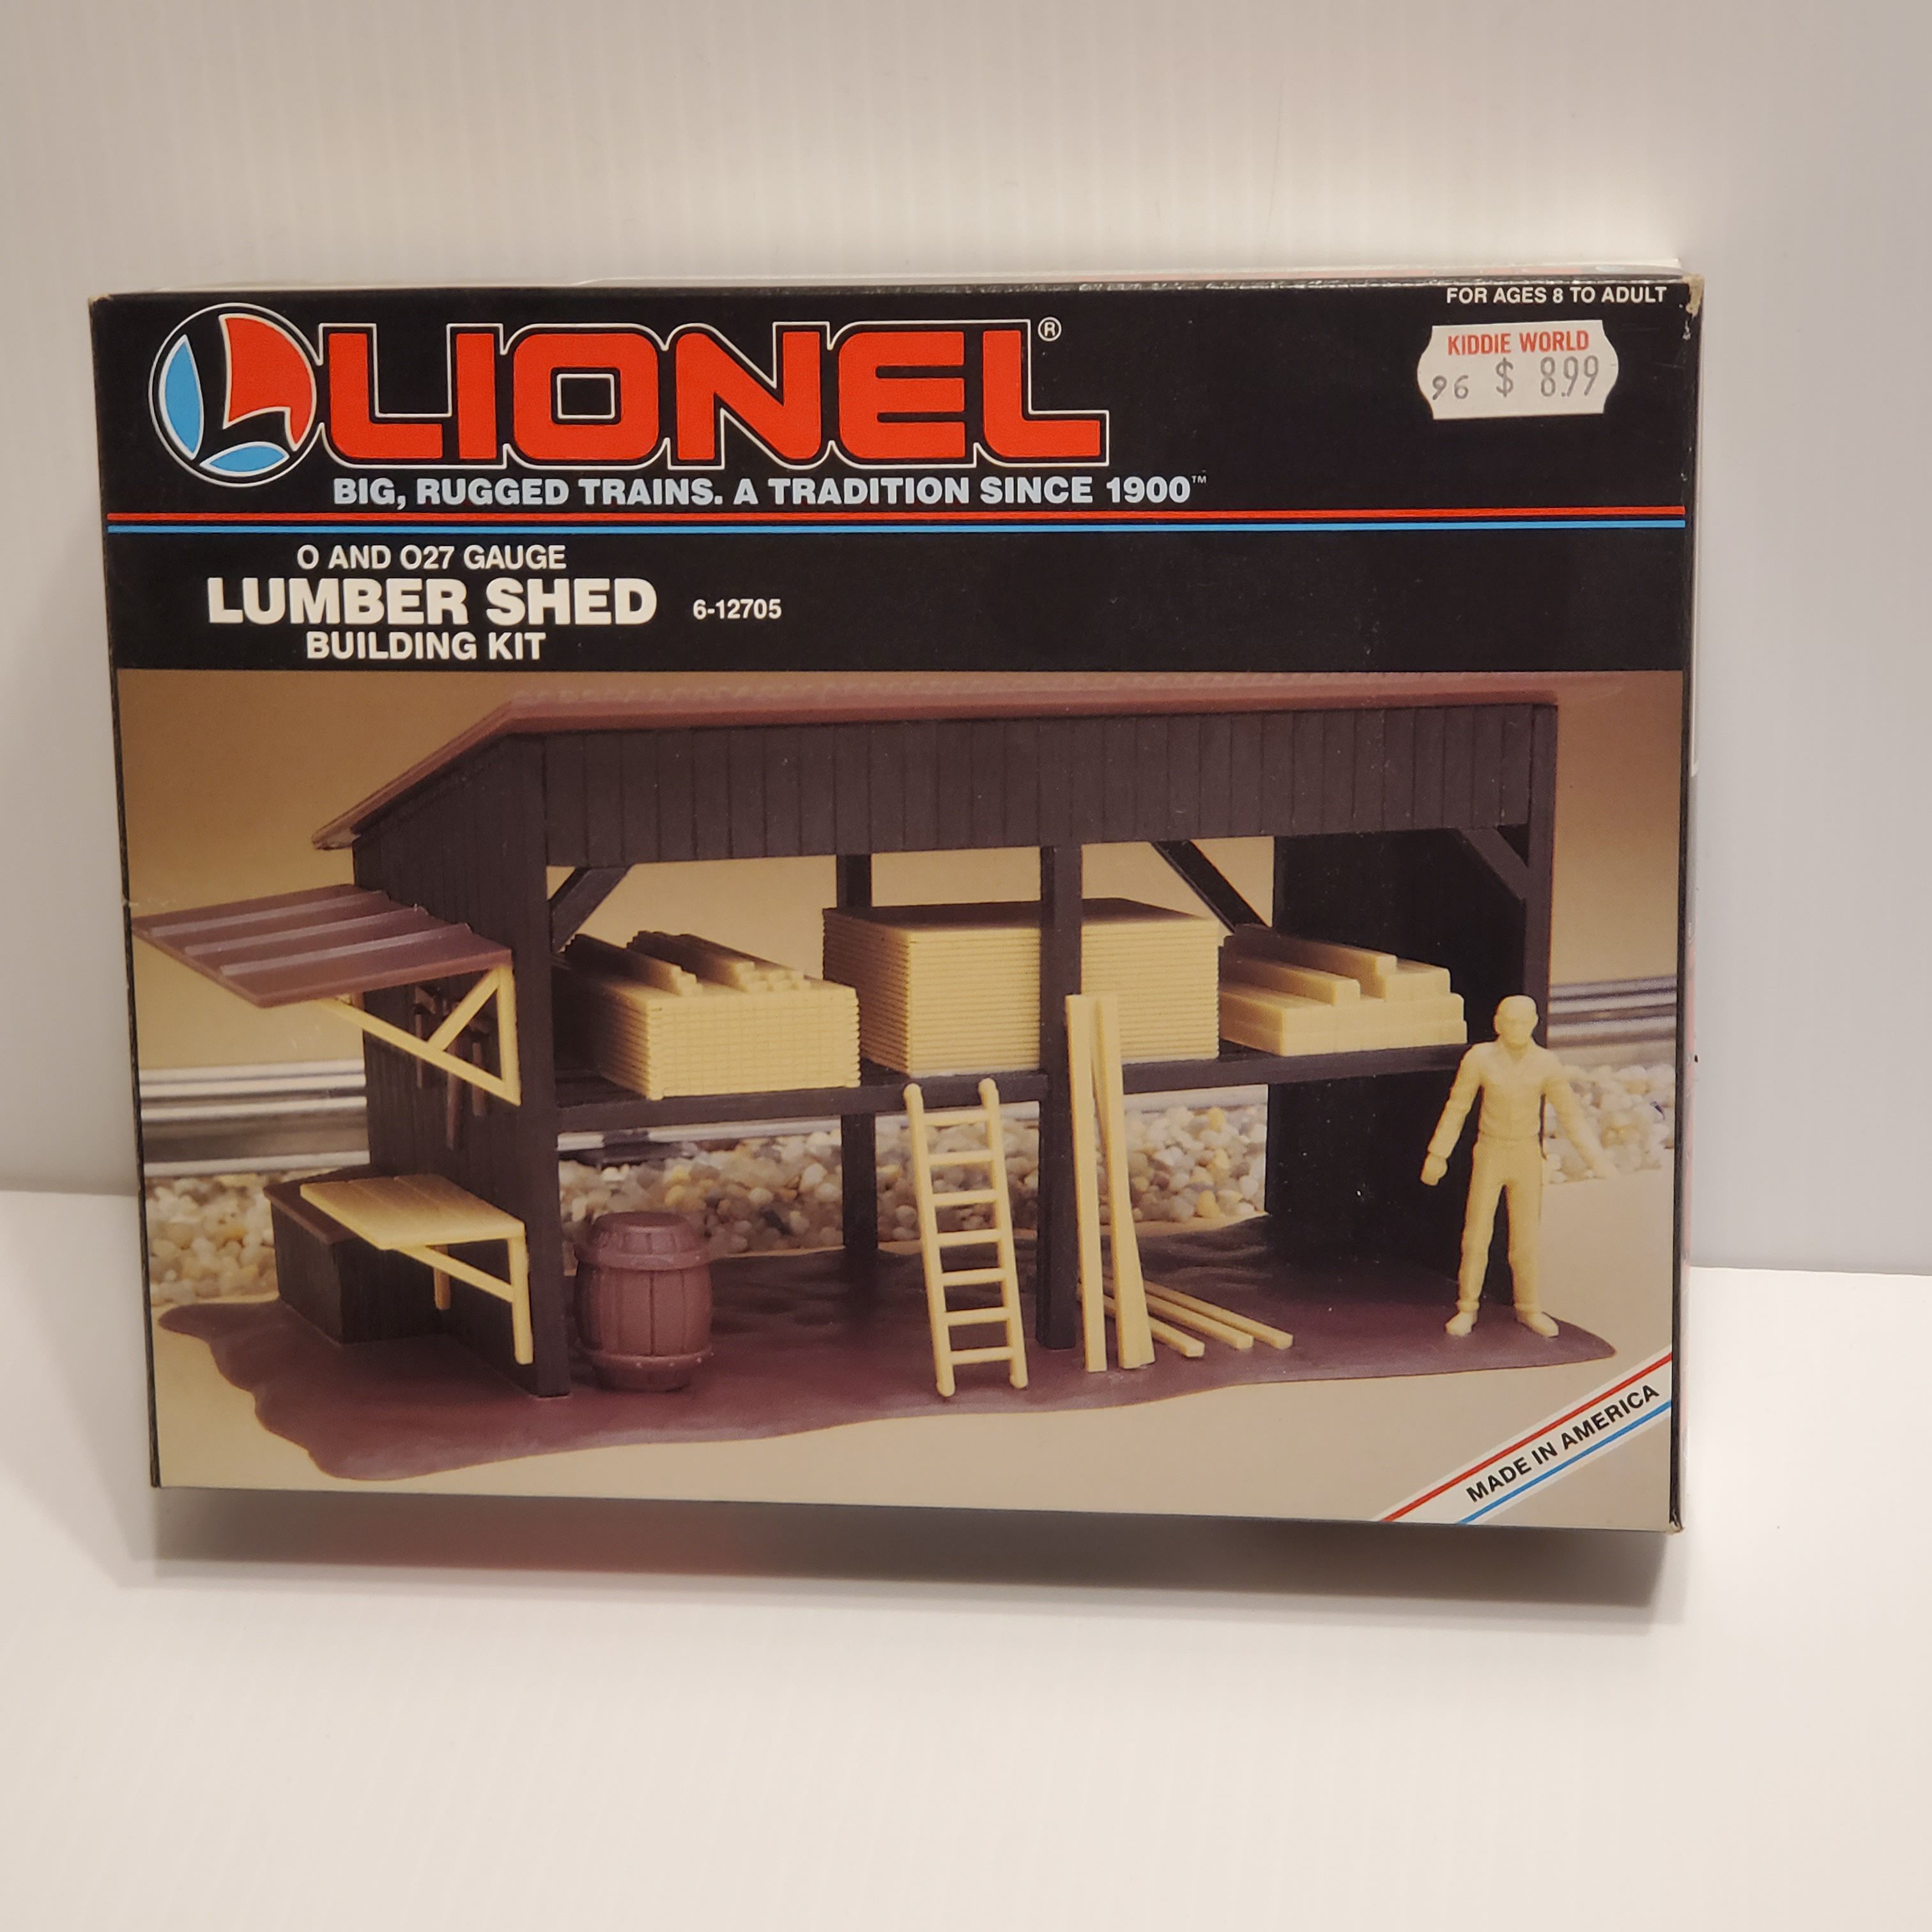 Lionel Lumbershed 6-12705 building kit. New, never been used. Made and Litho in USA. @1994